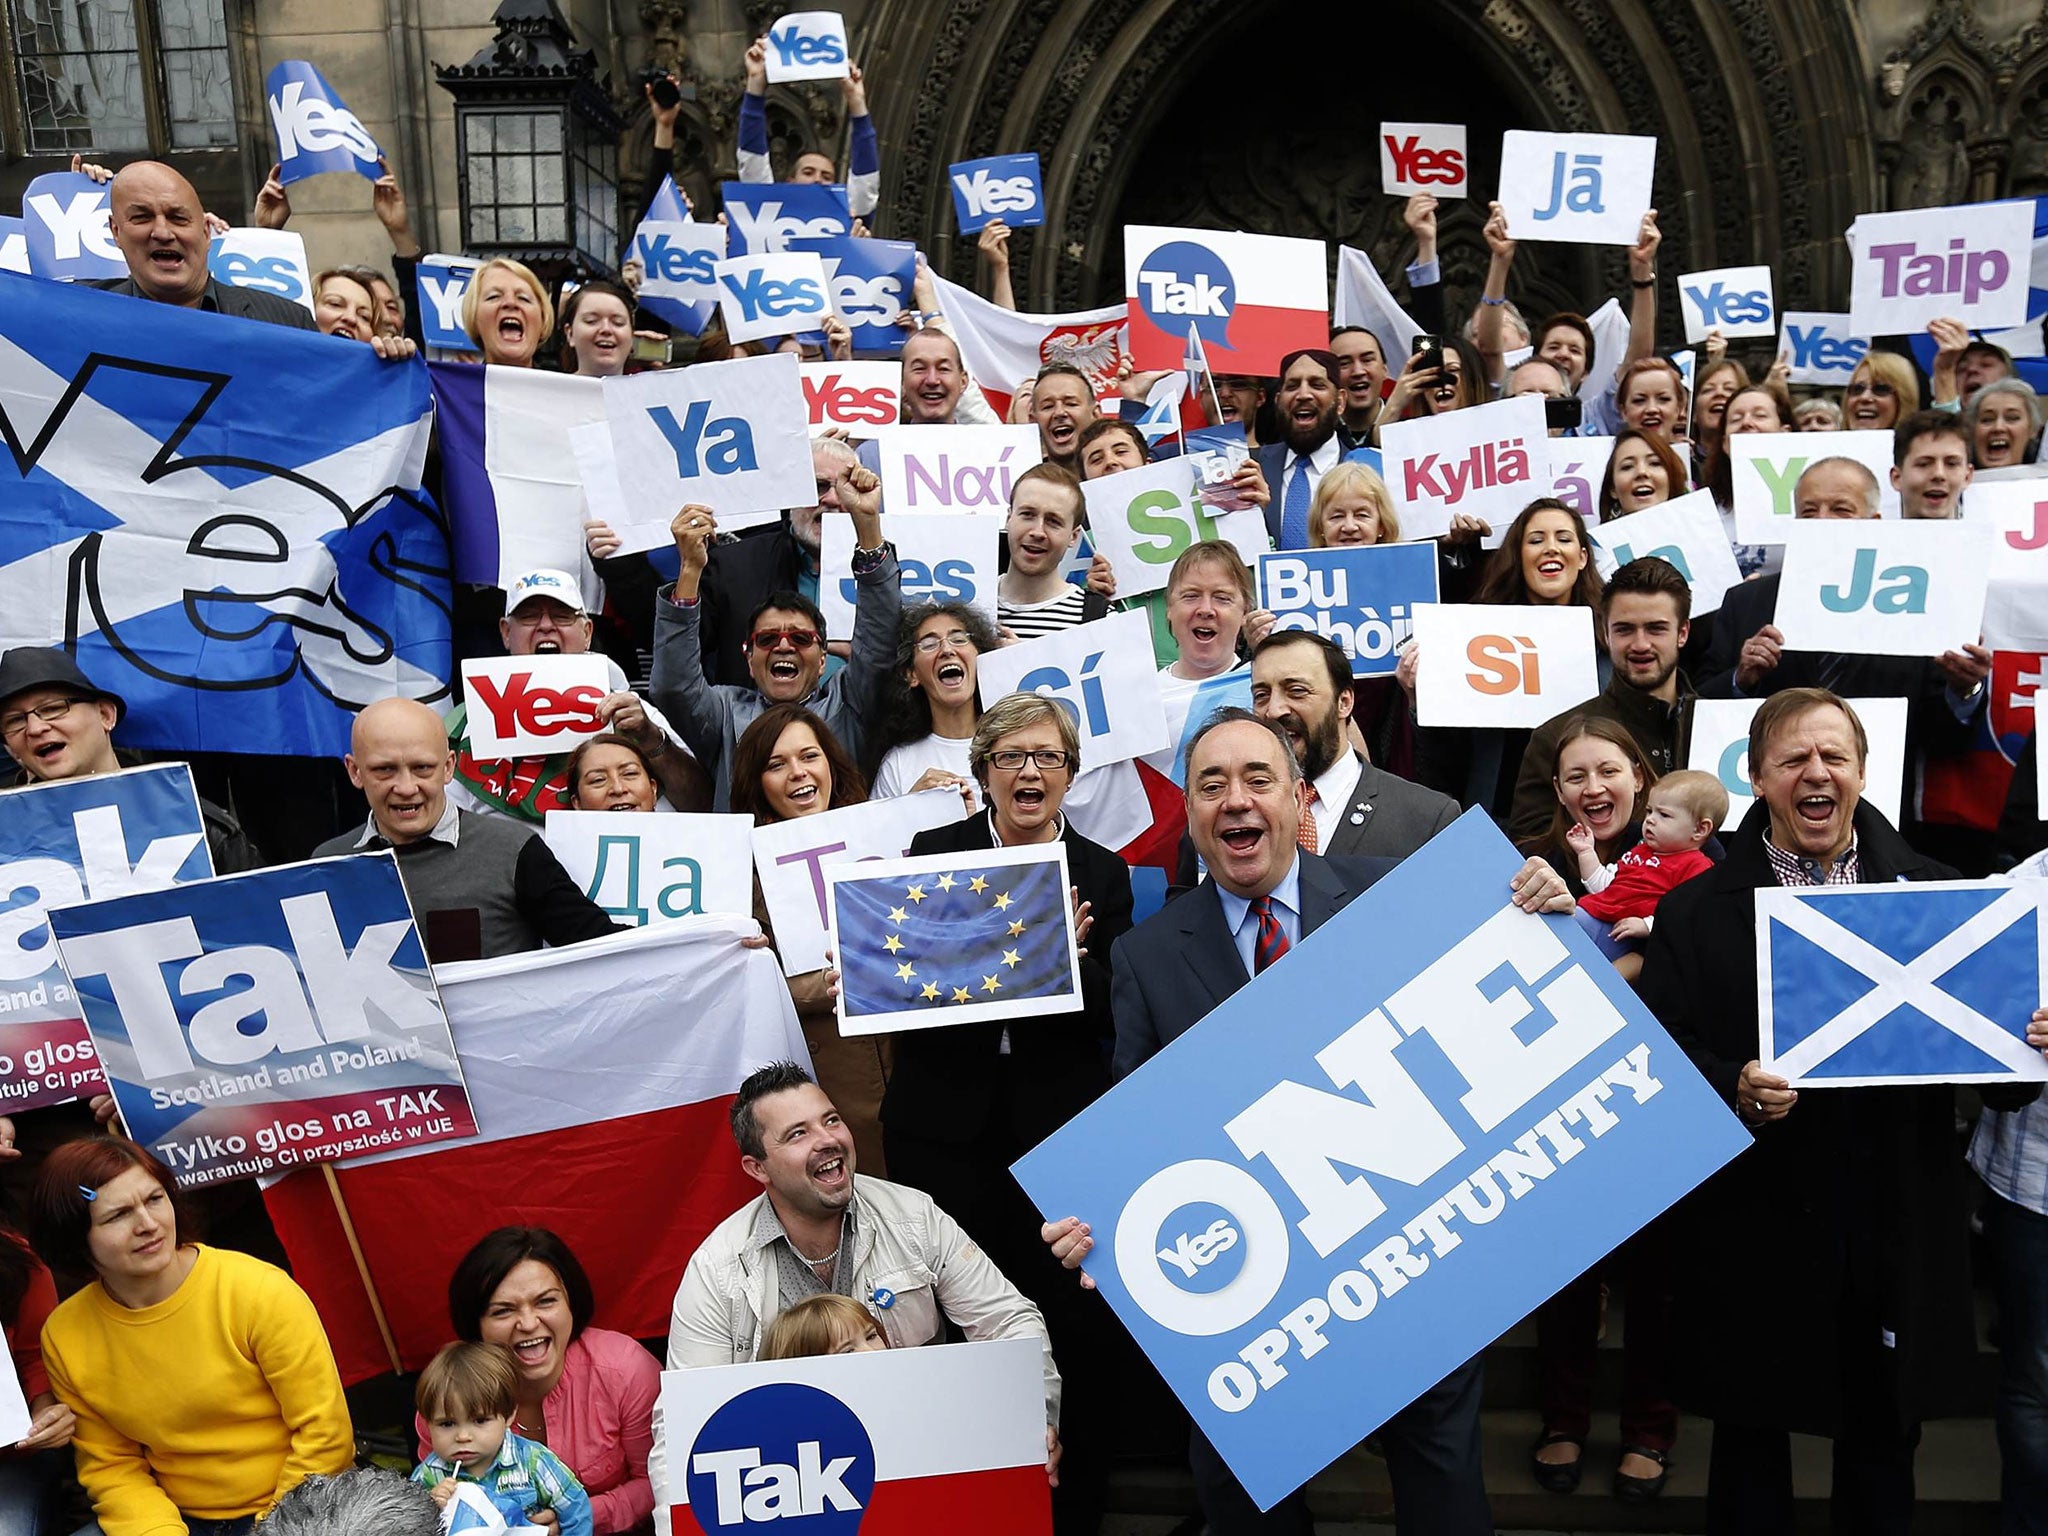 Scottish Independence Salmond Hails The Day The No Campaign Fell Apart At The Seams The